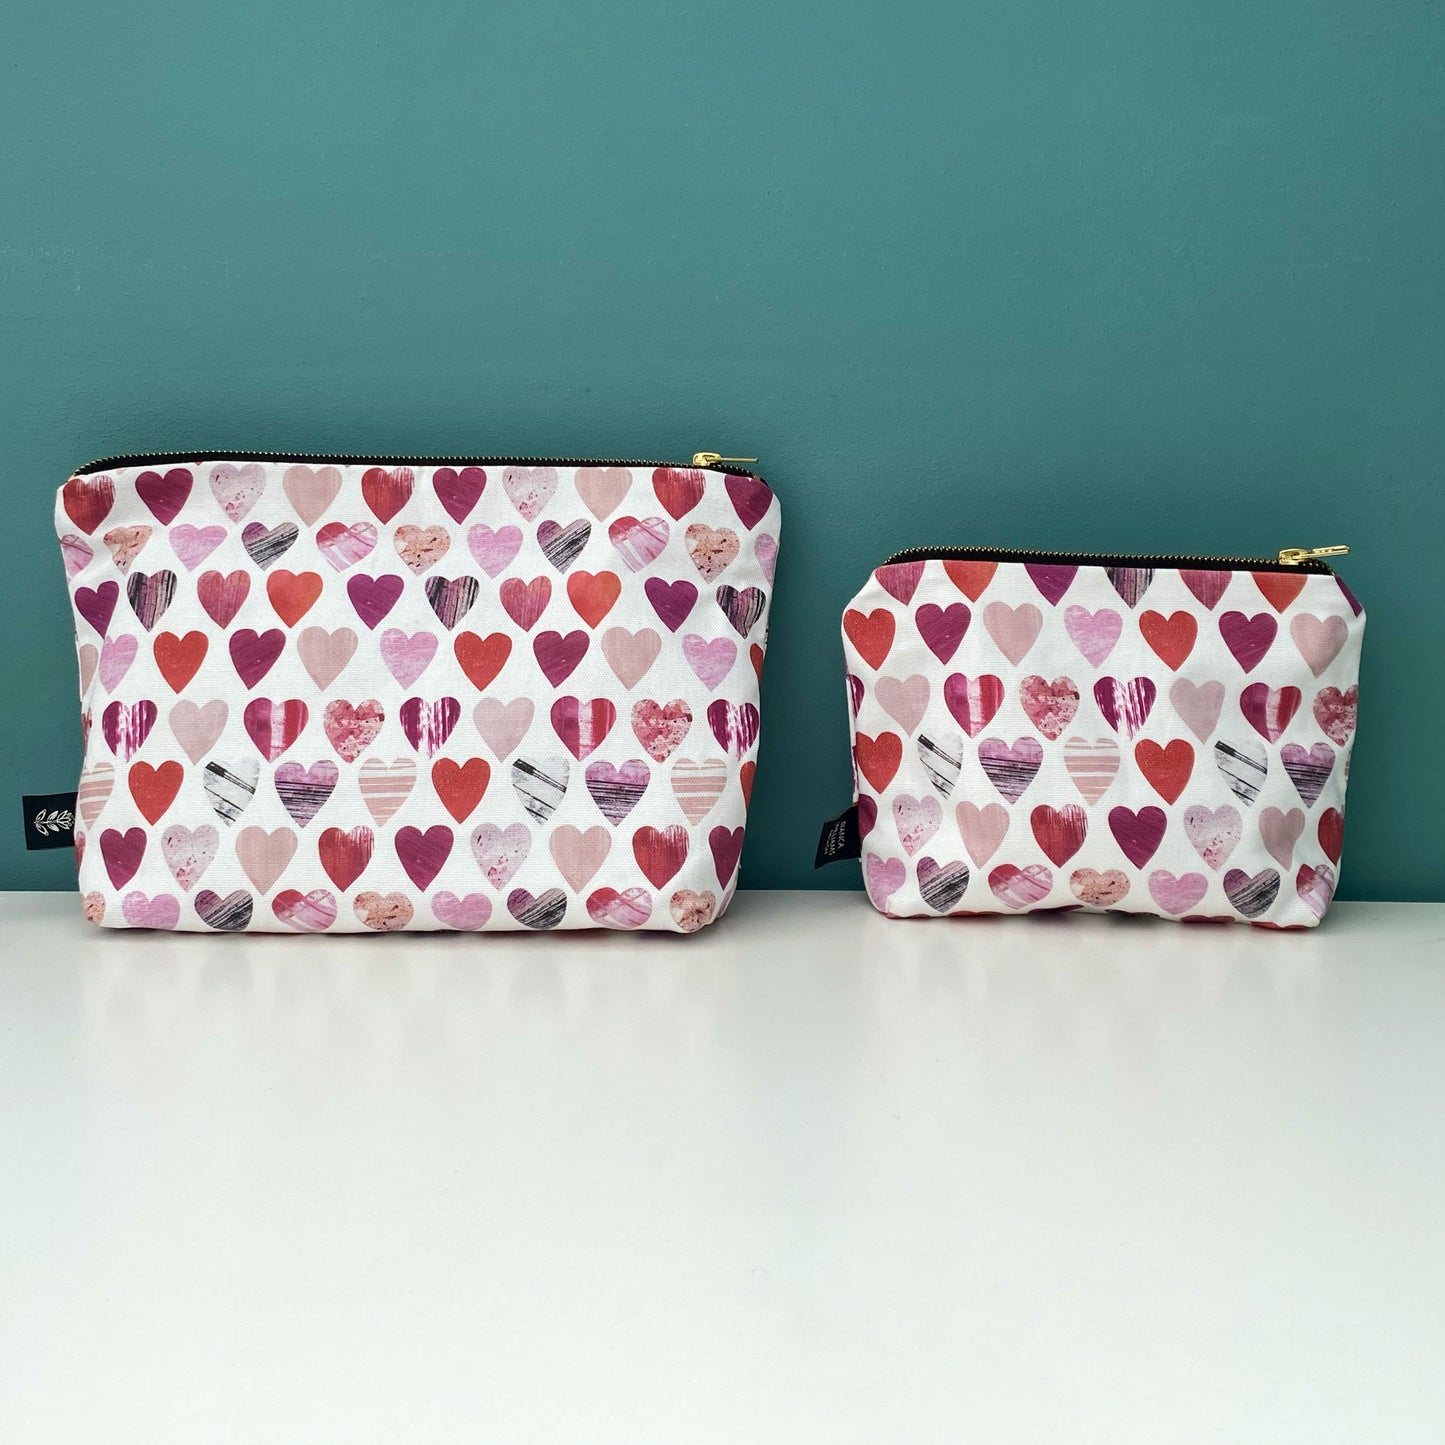 A large and small Hearts Wash Bag have been placed side by side on a white shelf.  They have gold metal zip and a Brande label sewn into the outside seam.